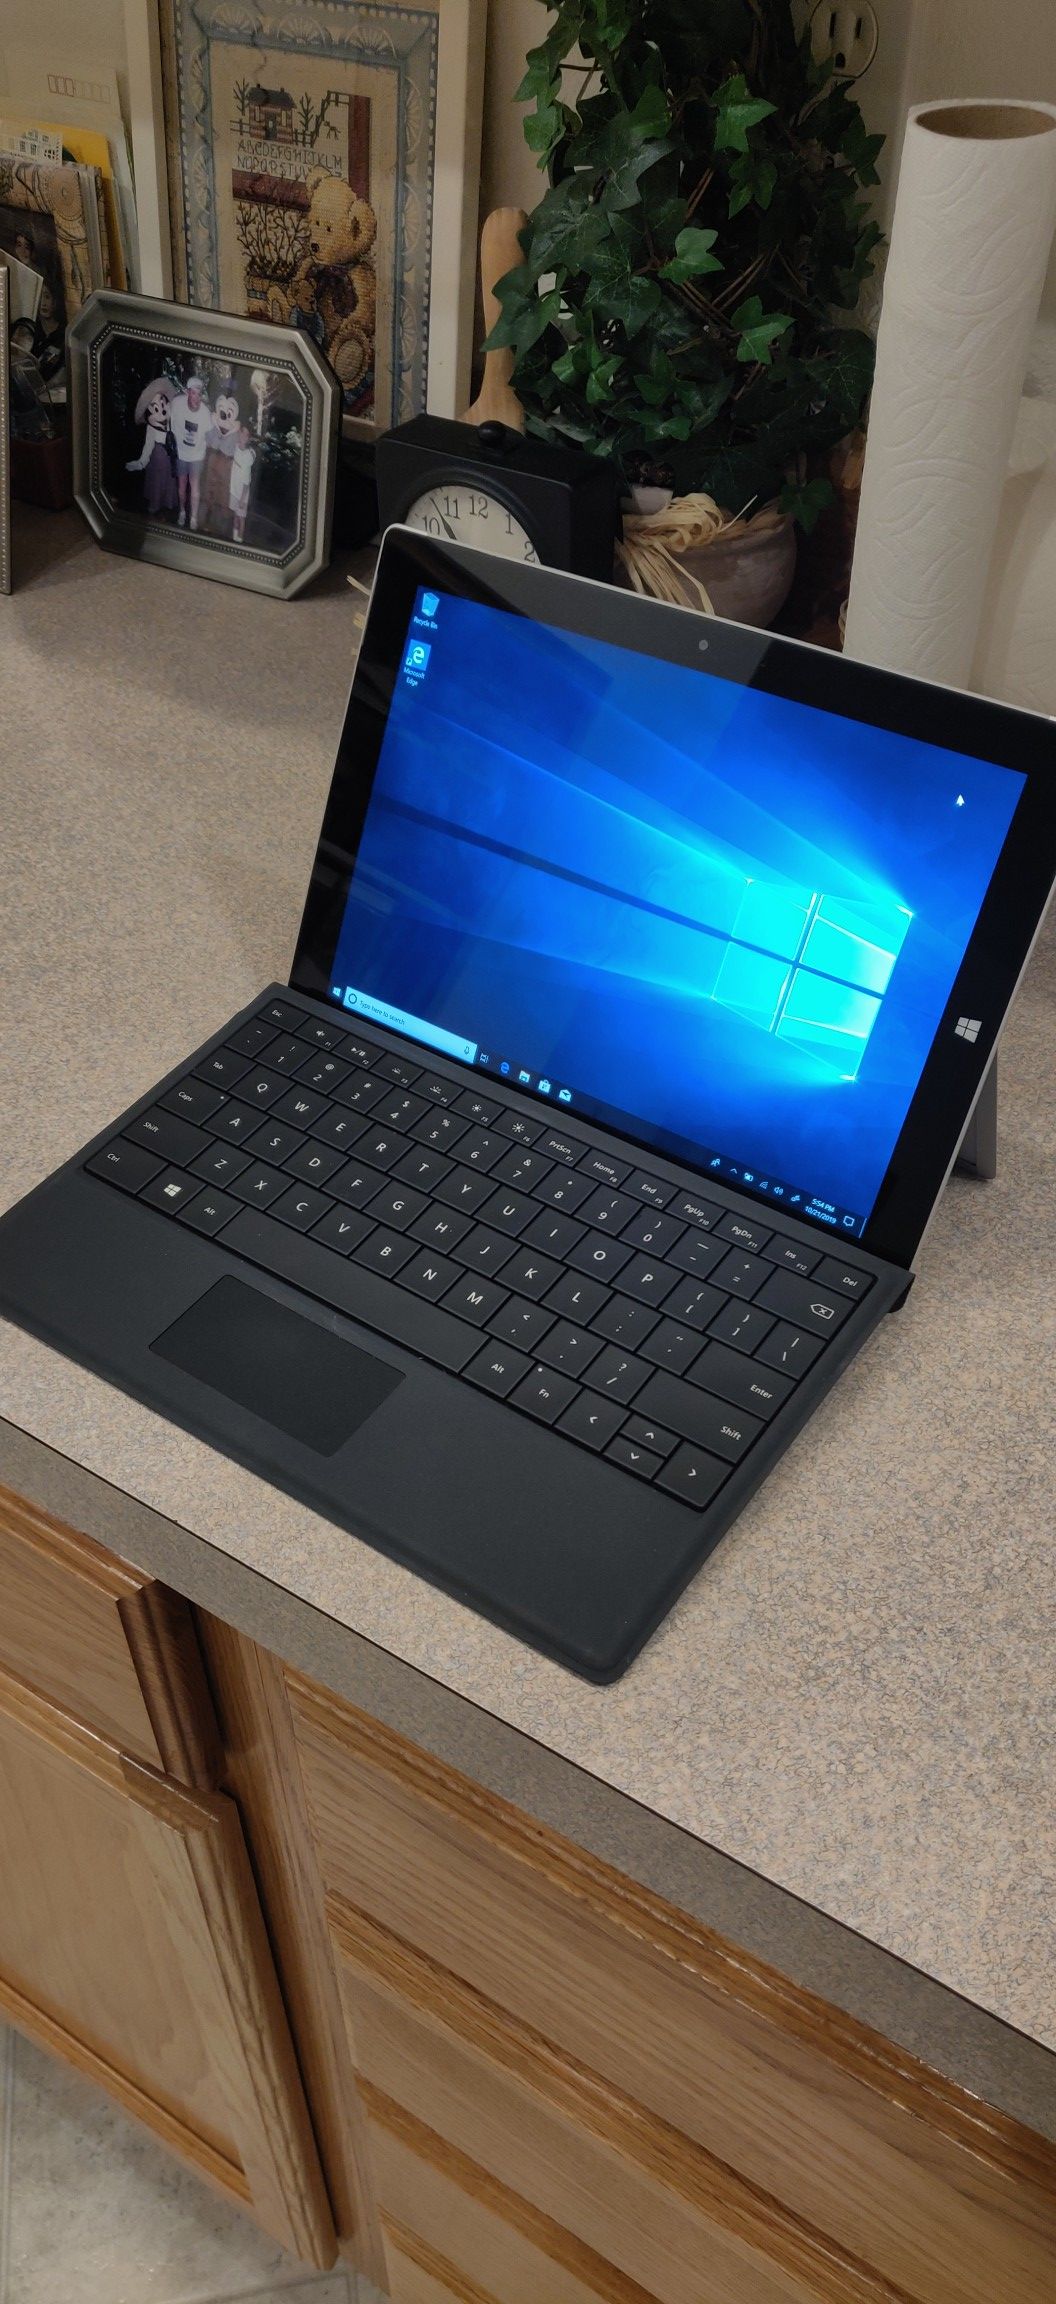 Windows Surface 3 Tablet WITH keyboard and headset